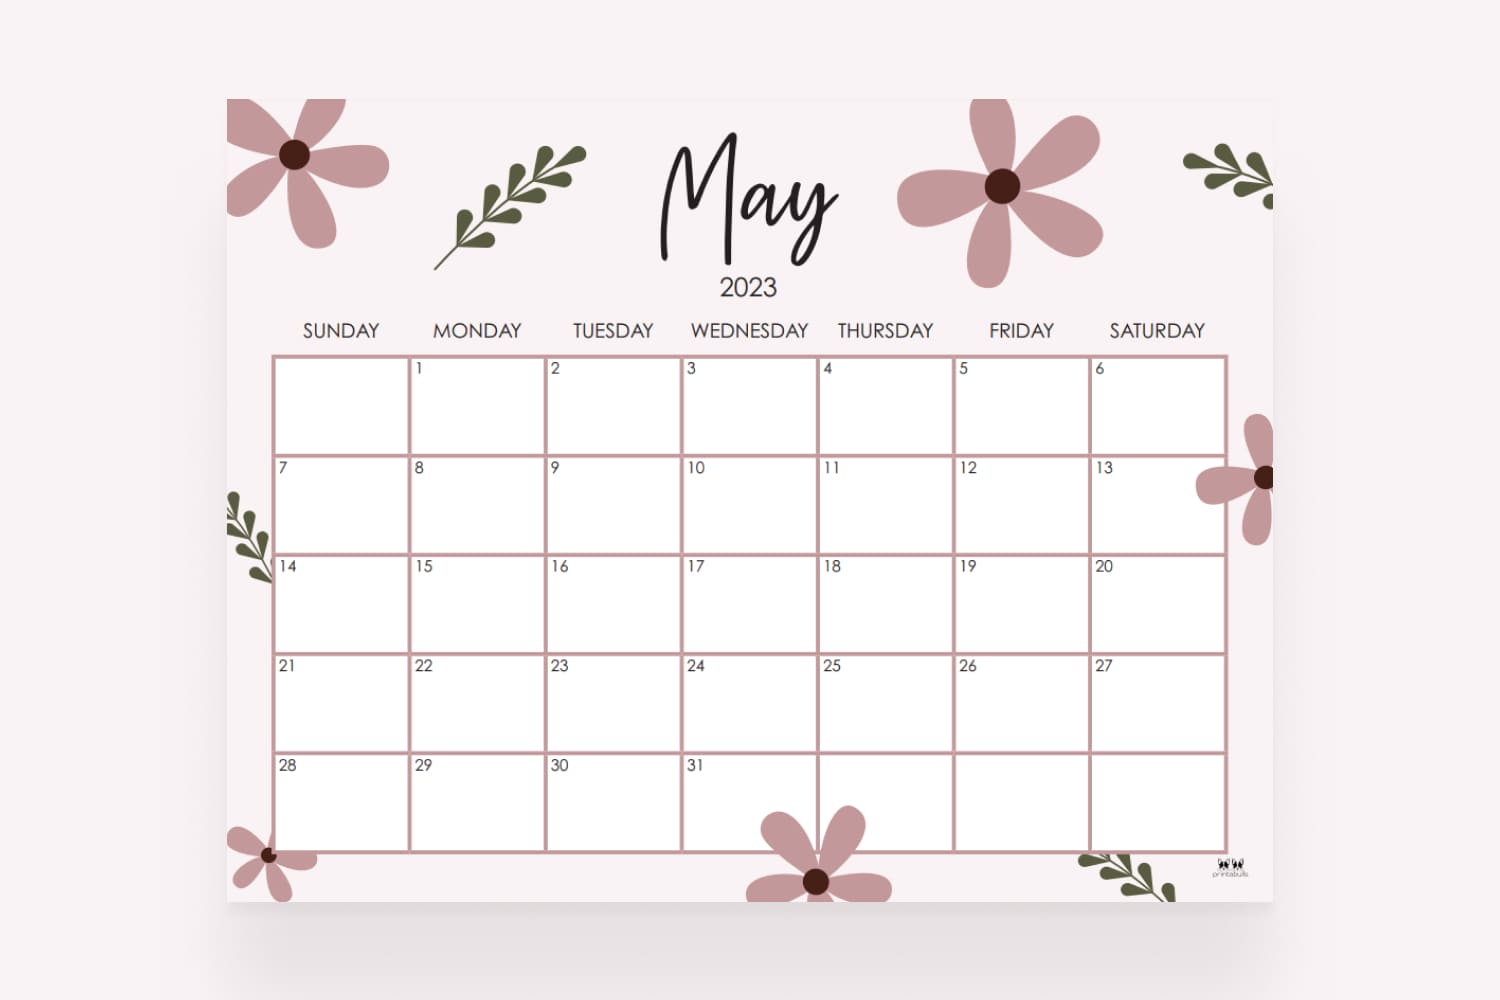 Calendar with a clean and minimalistic flower layout and large date boxes.